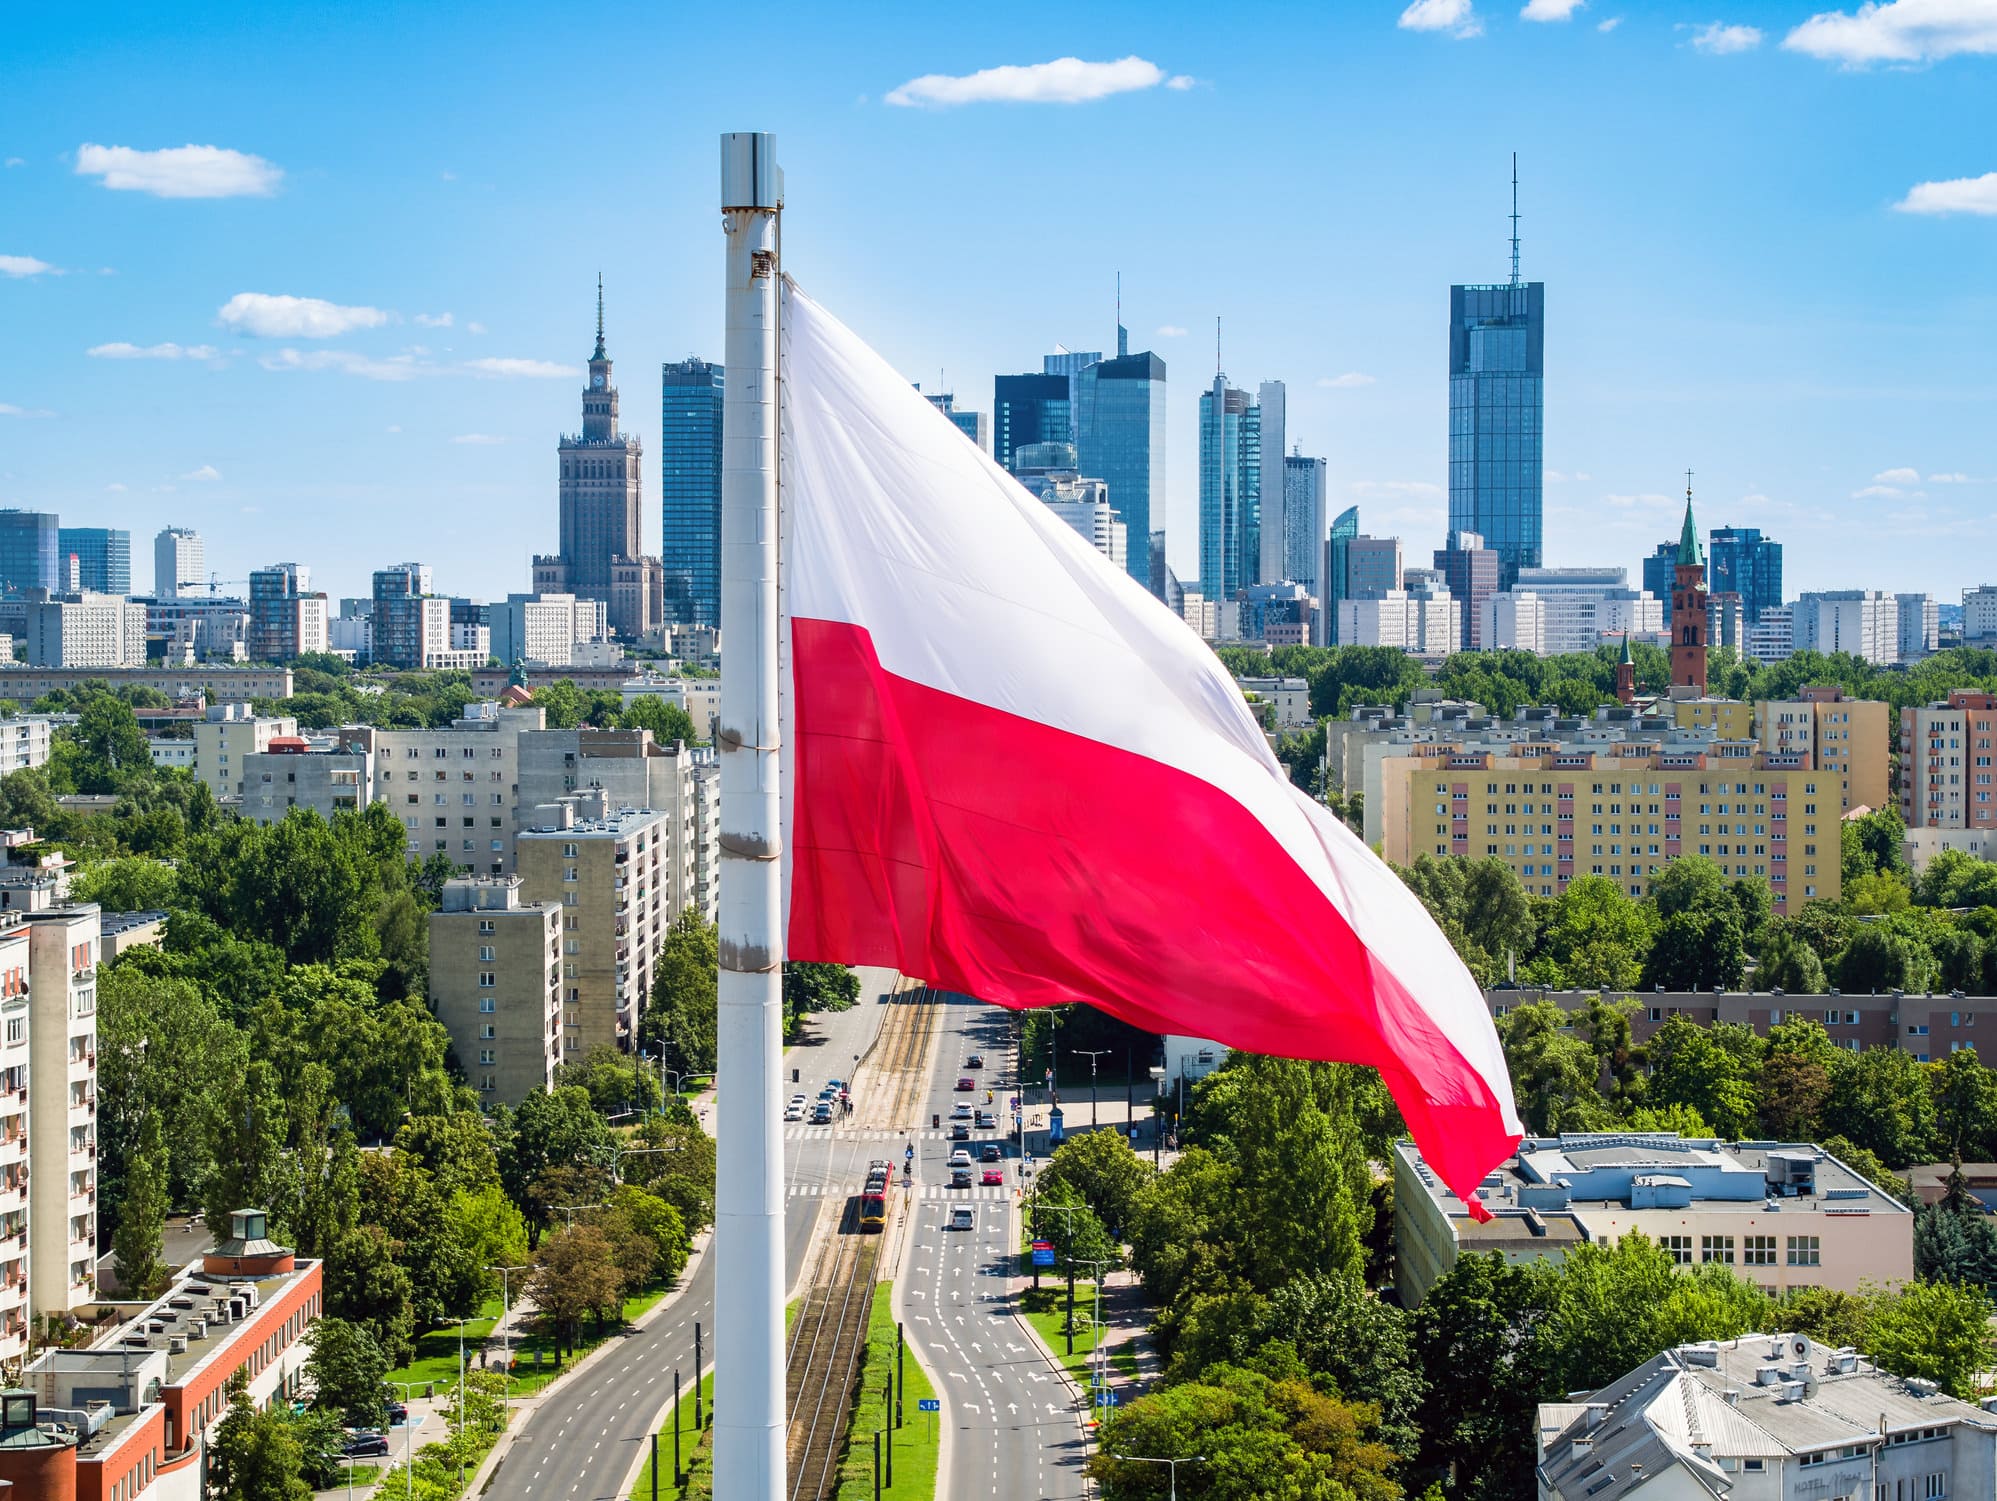 Polish flag with the background scenery of Warsaw.